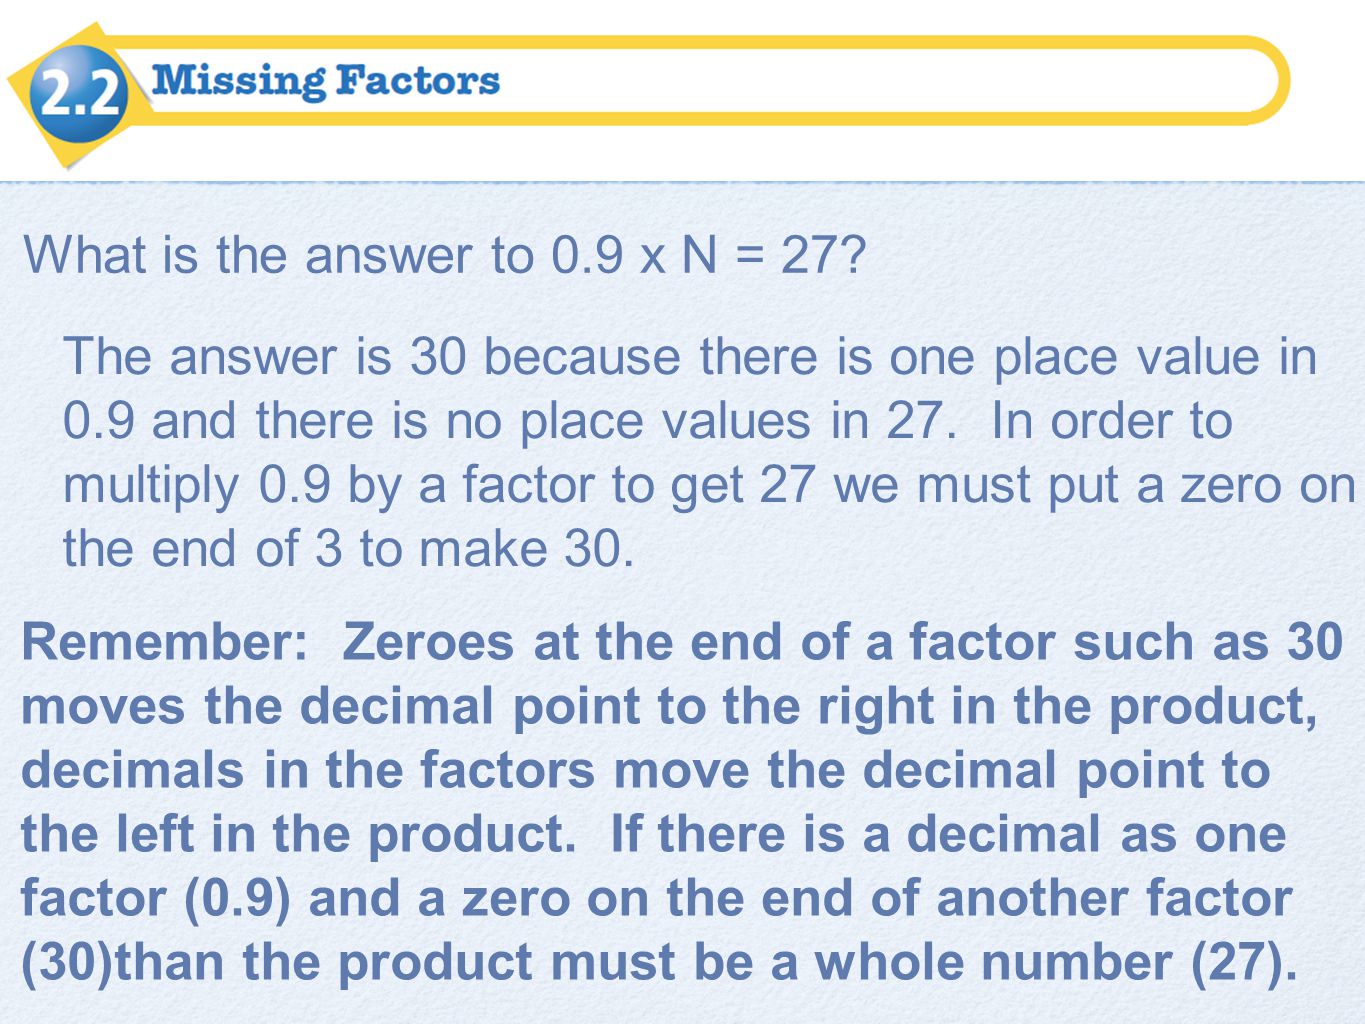 What is the answer to 0.9 x N = 27